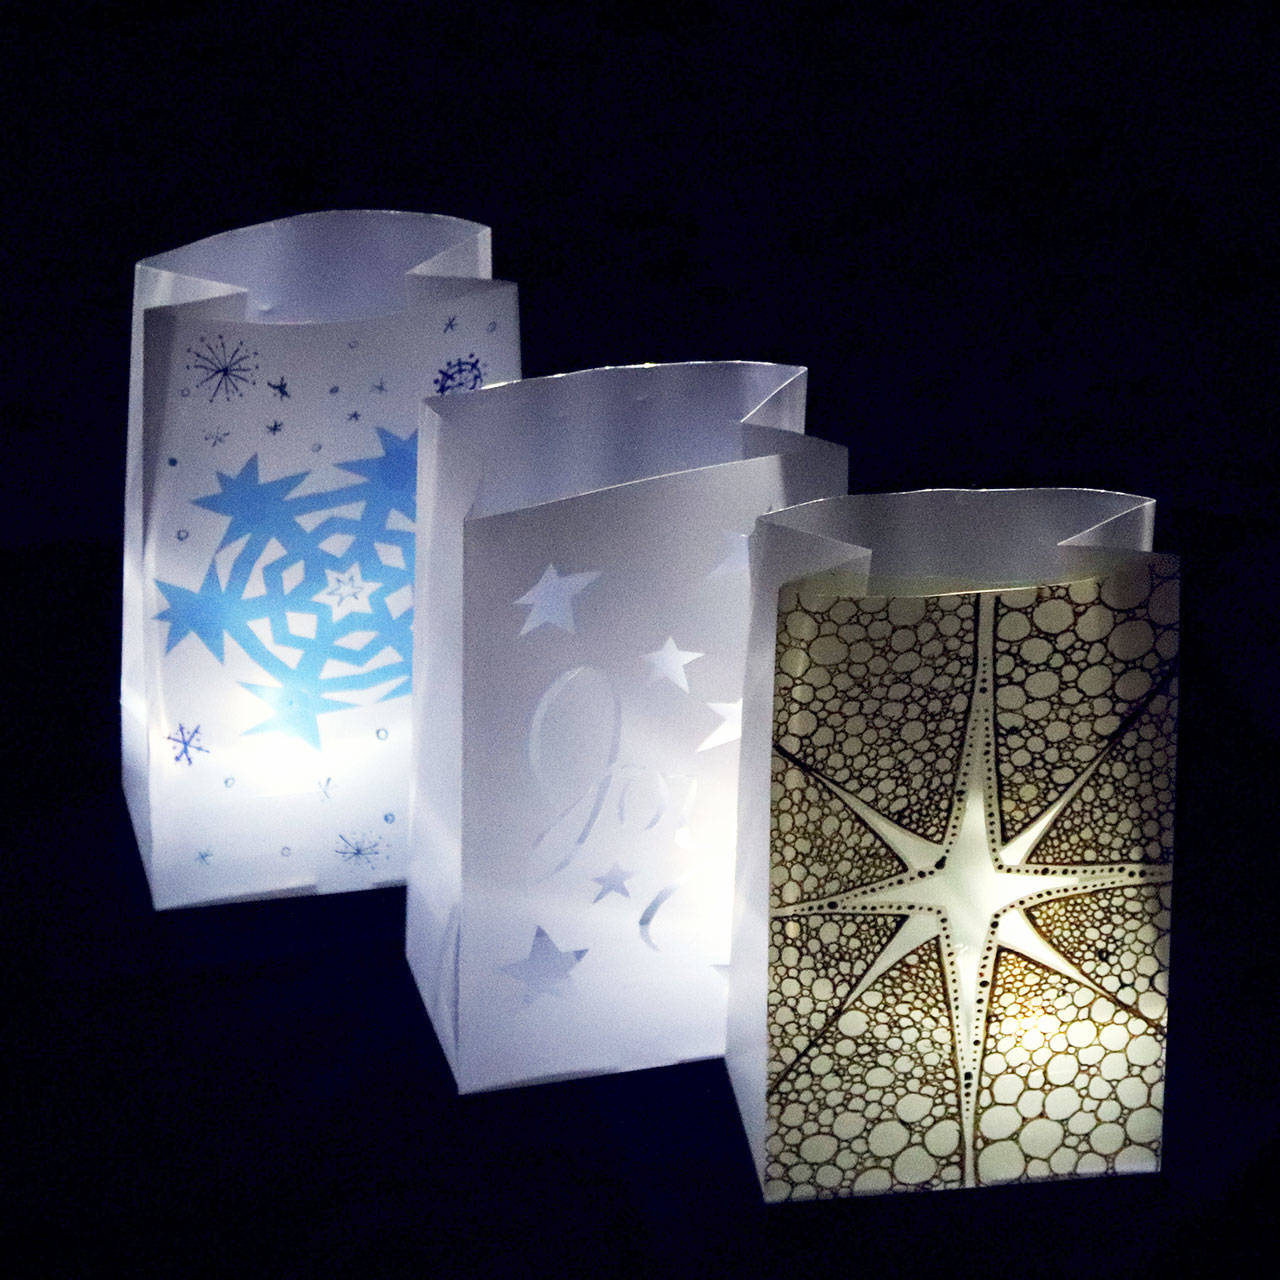 Adults, teens and children 5 and older are invited to make luminarias at the Port Angeles Fine Arts Center this evening. (Sarah Jane/Port Angeles Fine Arts Center)